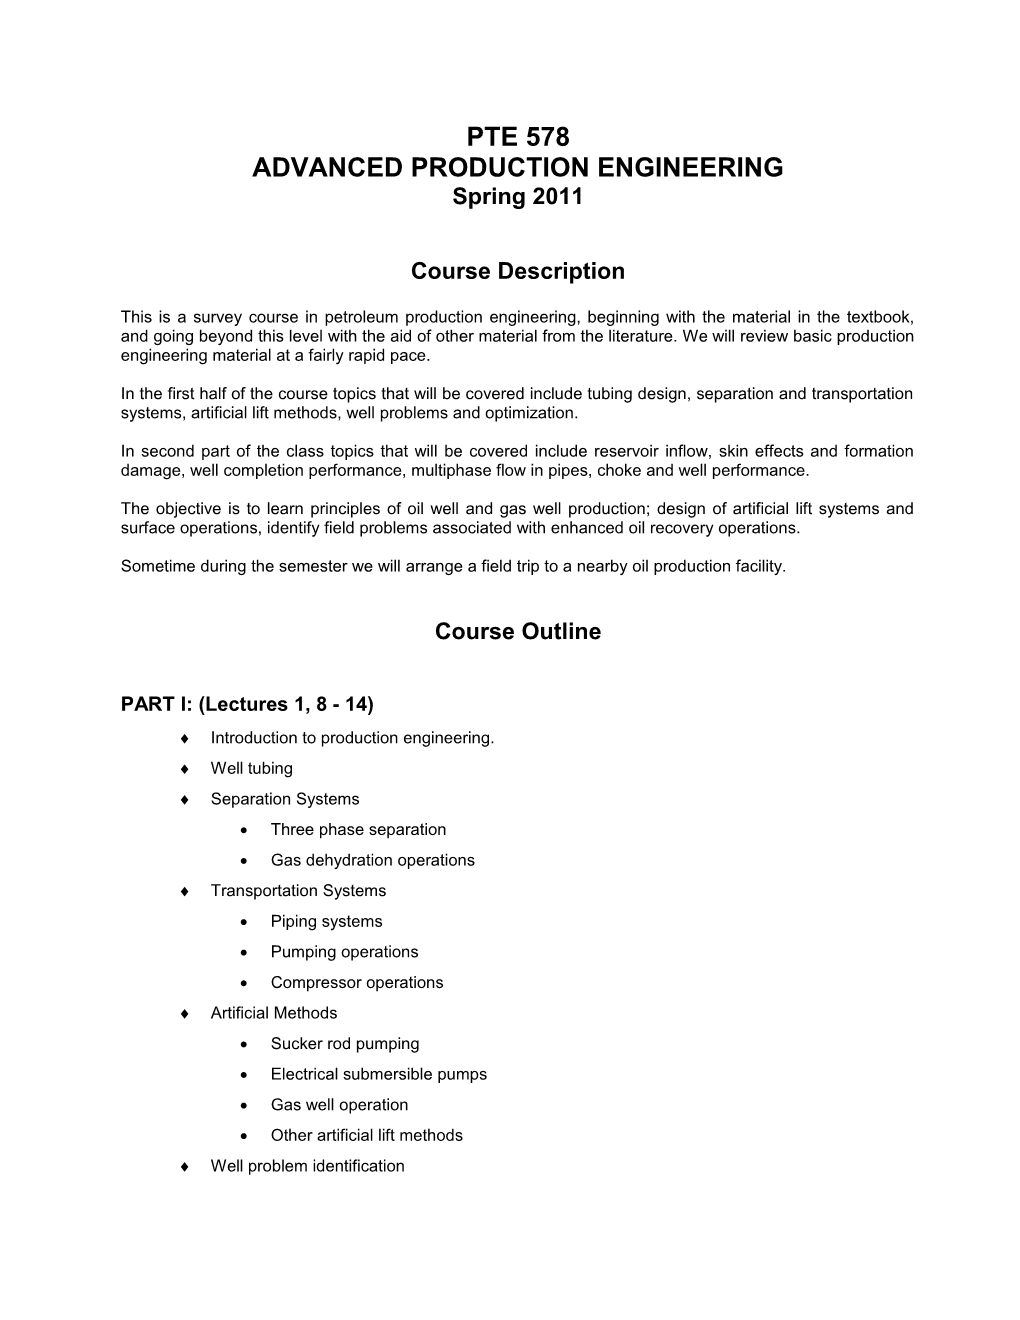 Pte 578- Advanced Production Engineering